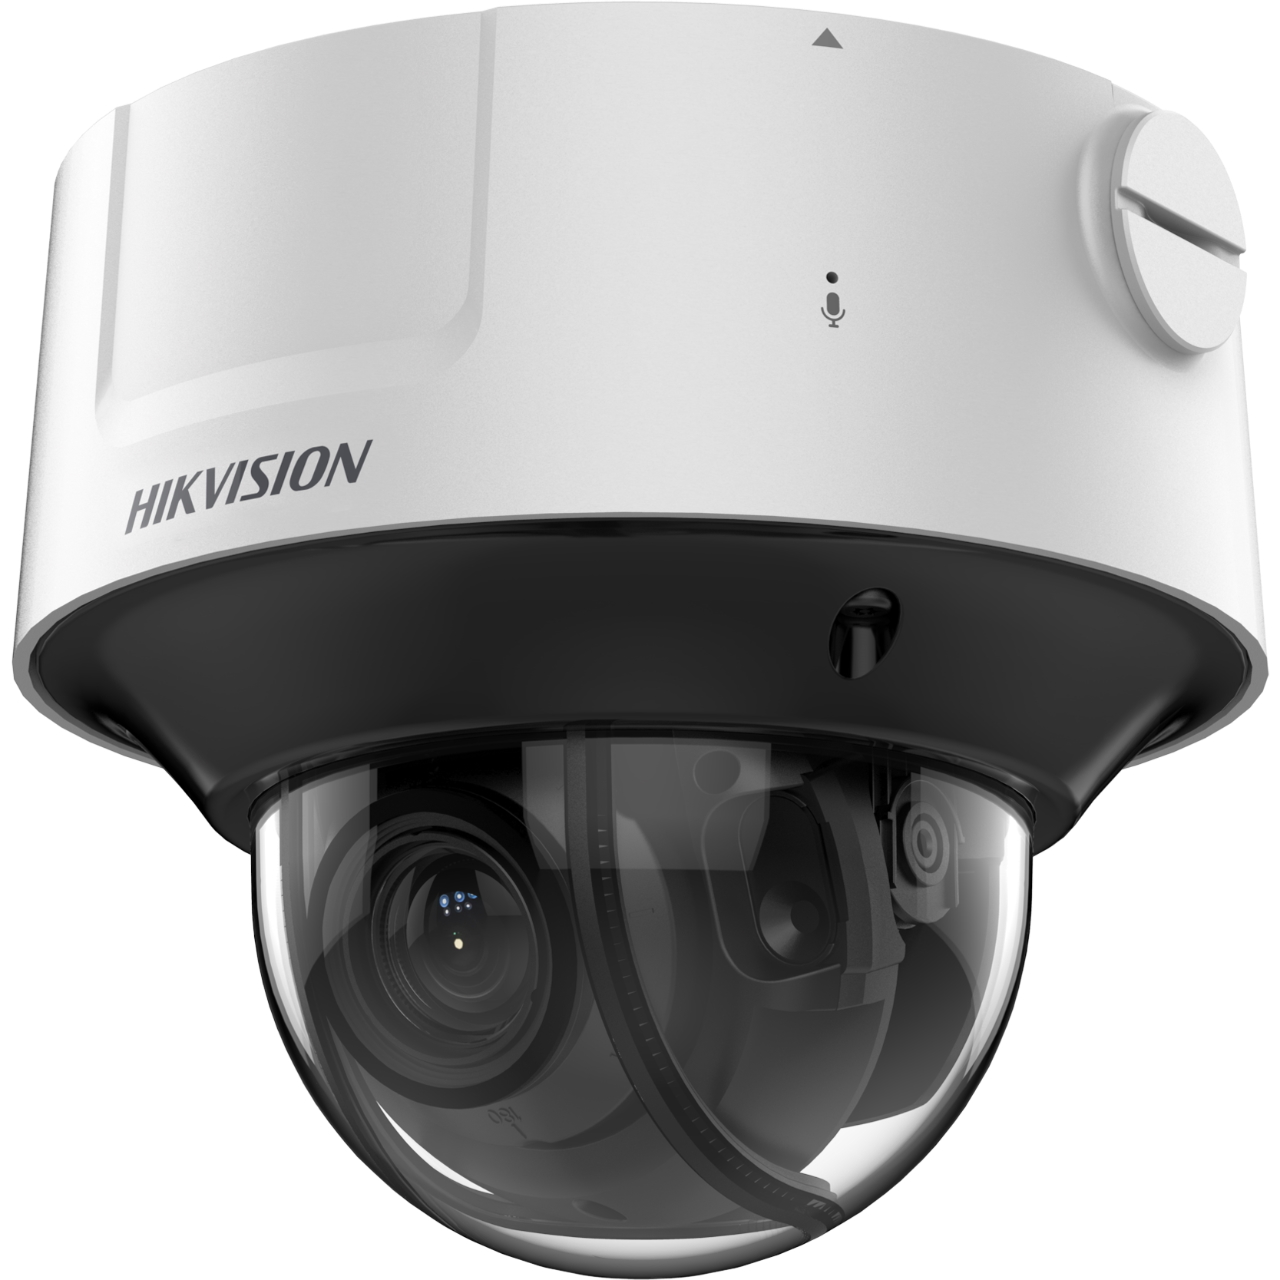 20000659 Hikvision DeeipinView camera dome 4MP, VF, 2.8-12mm